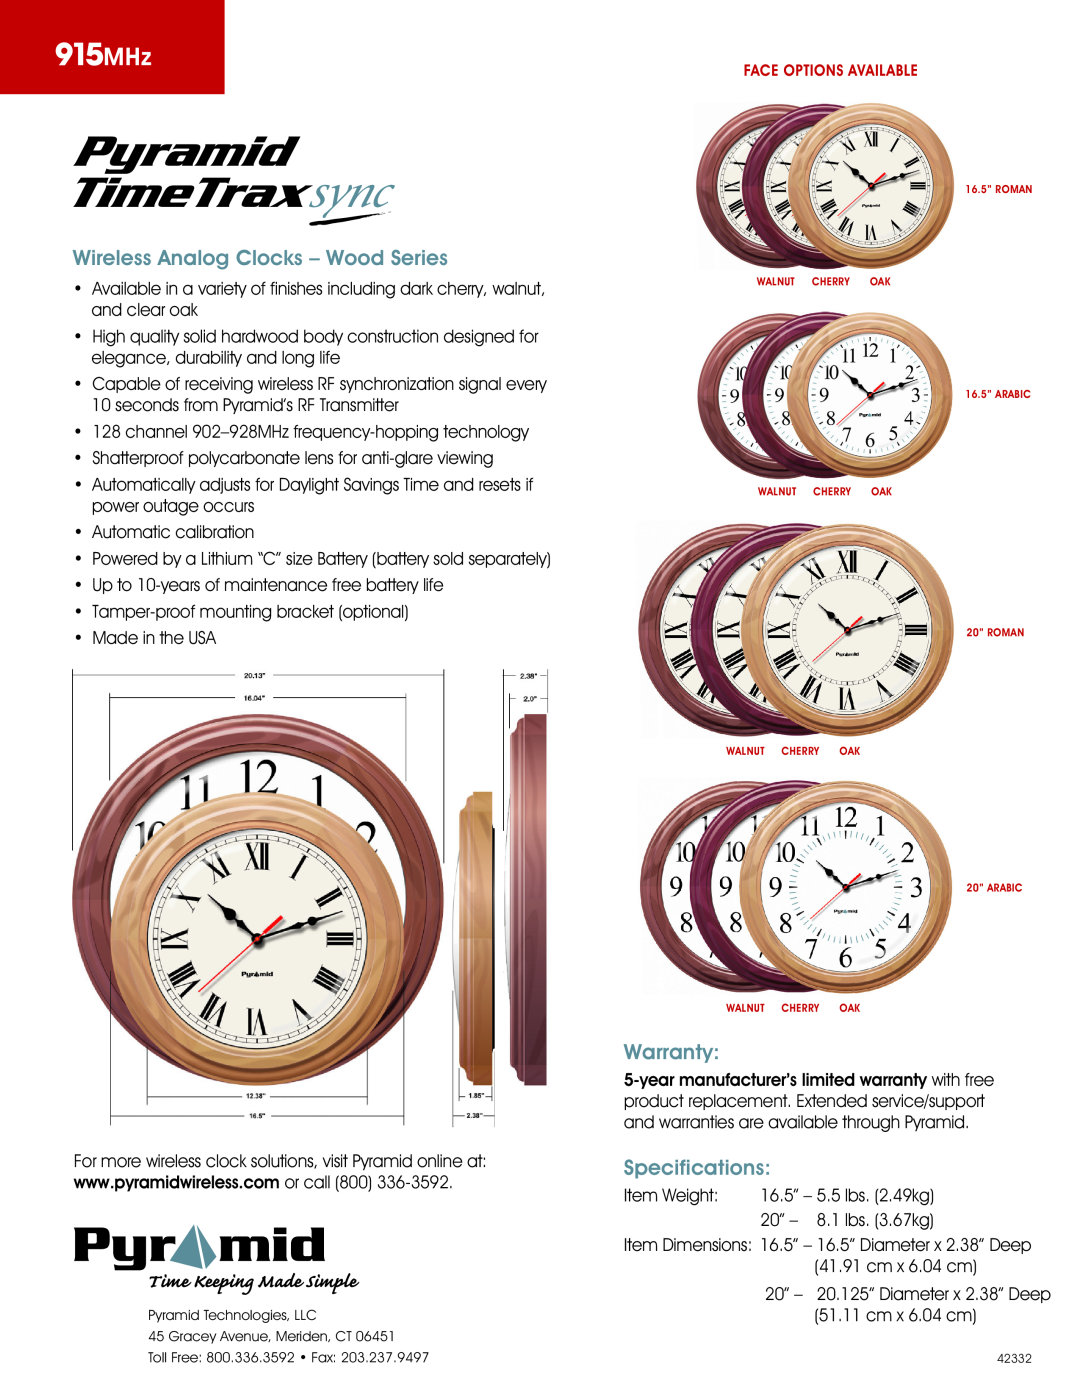 Pyramid Technologies manual 915MHz, Wireless Analog Clocks - Wood Series, Warranty, Specifications, Weight, Dimensions 